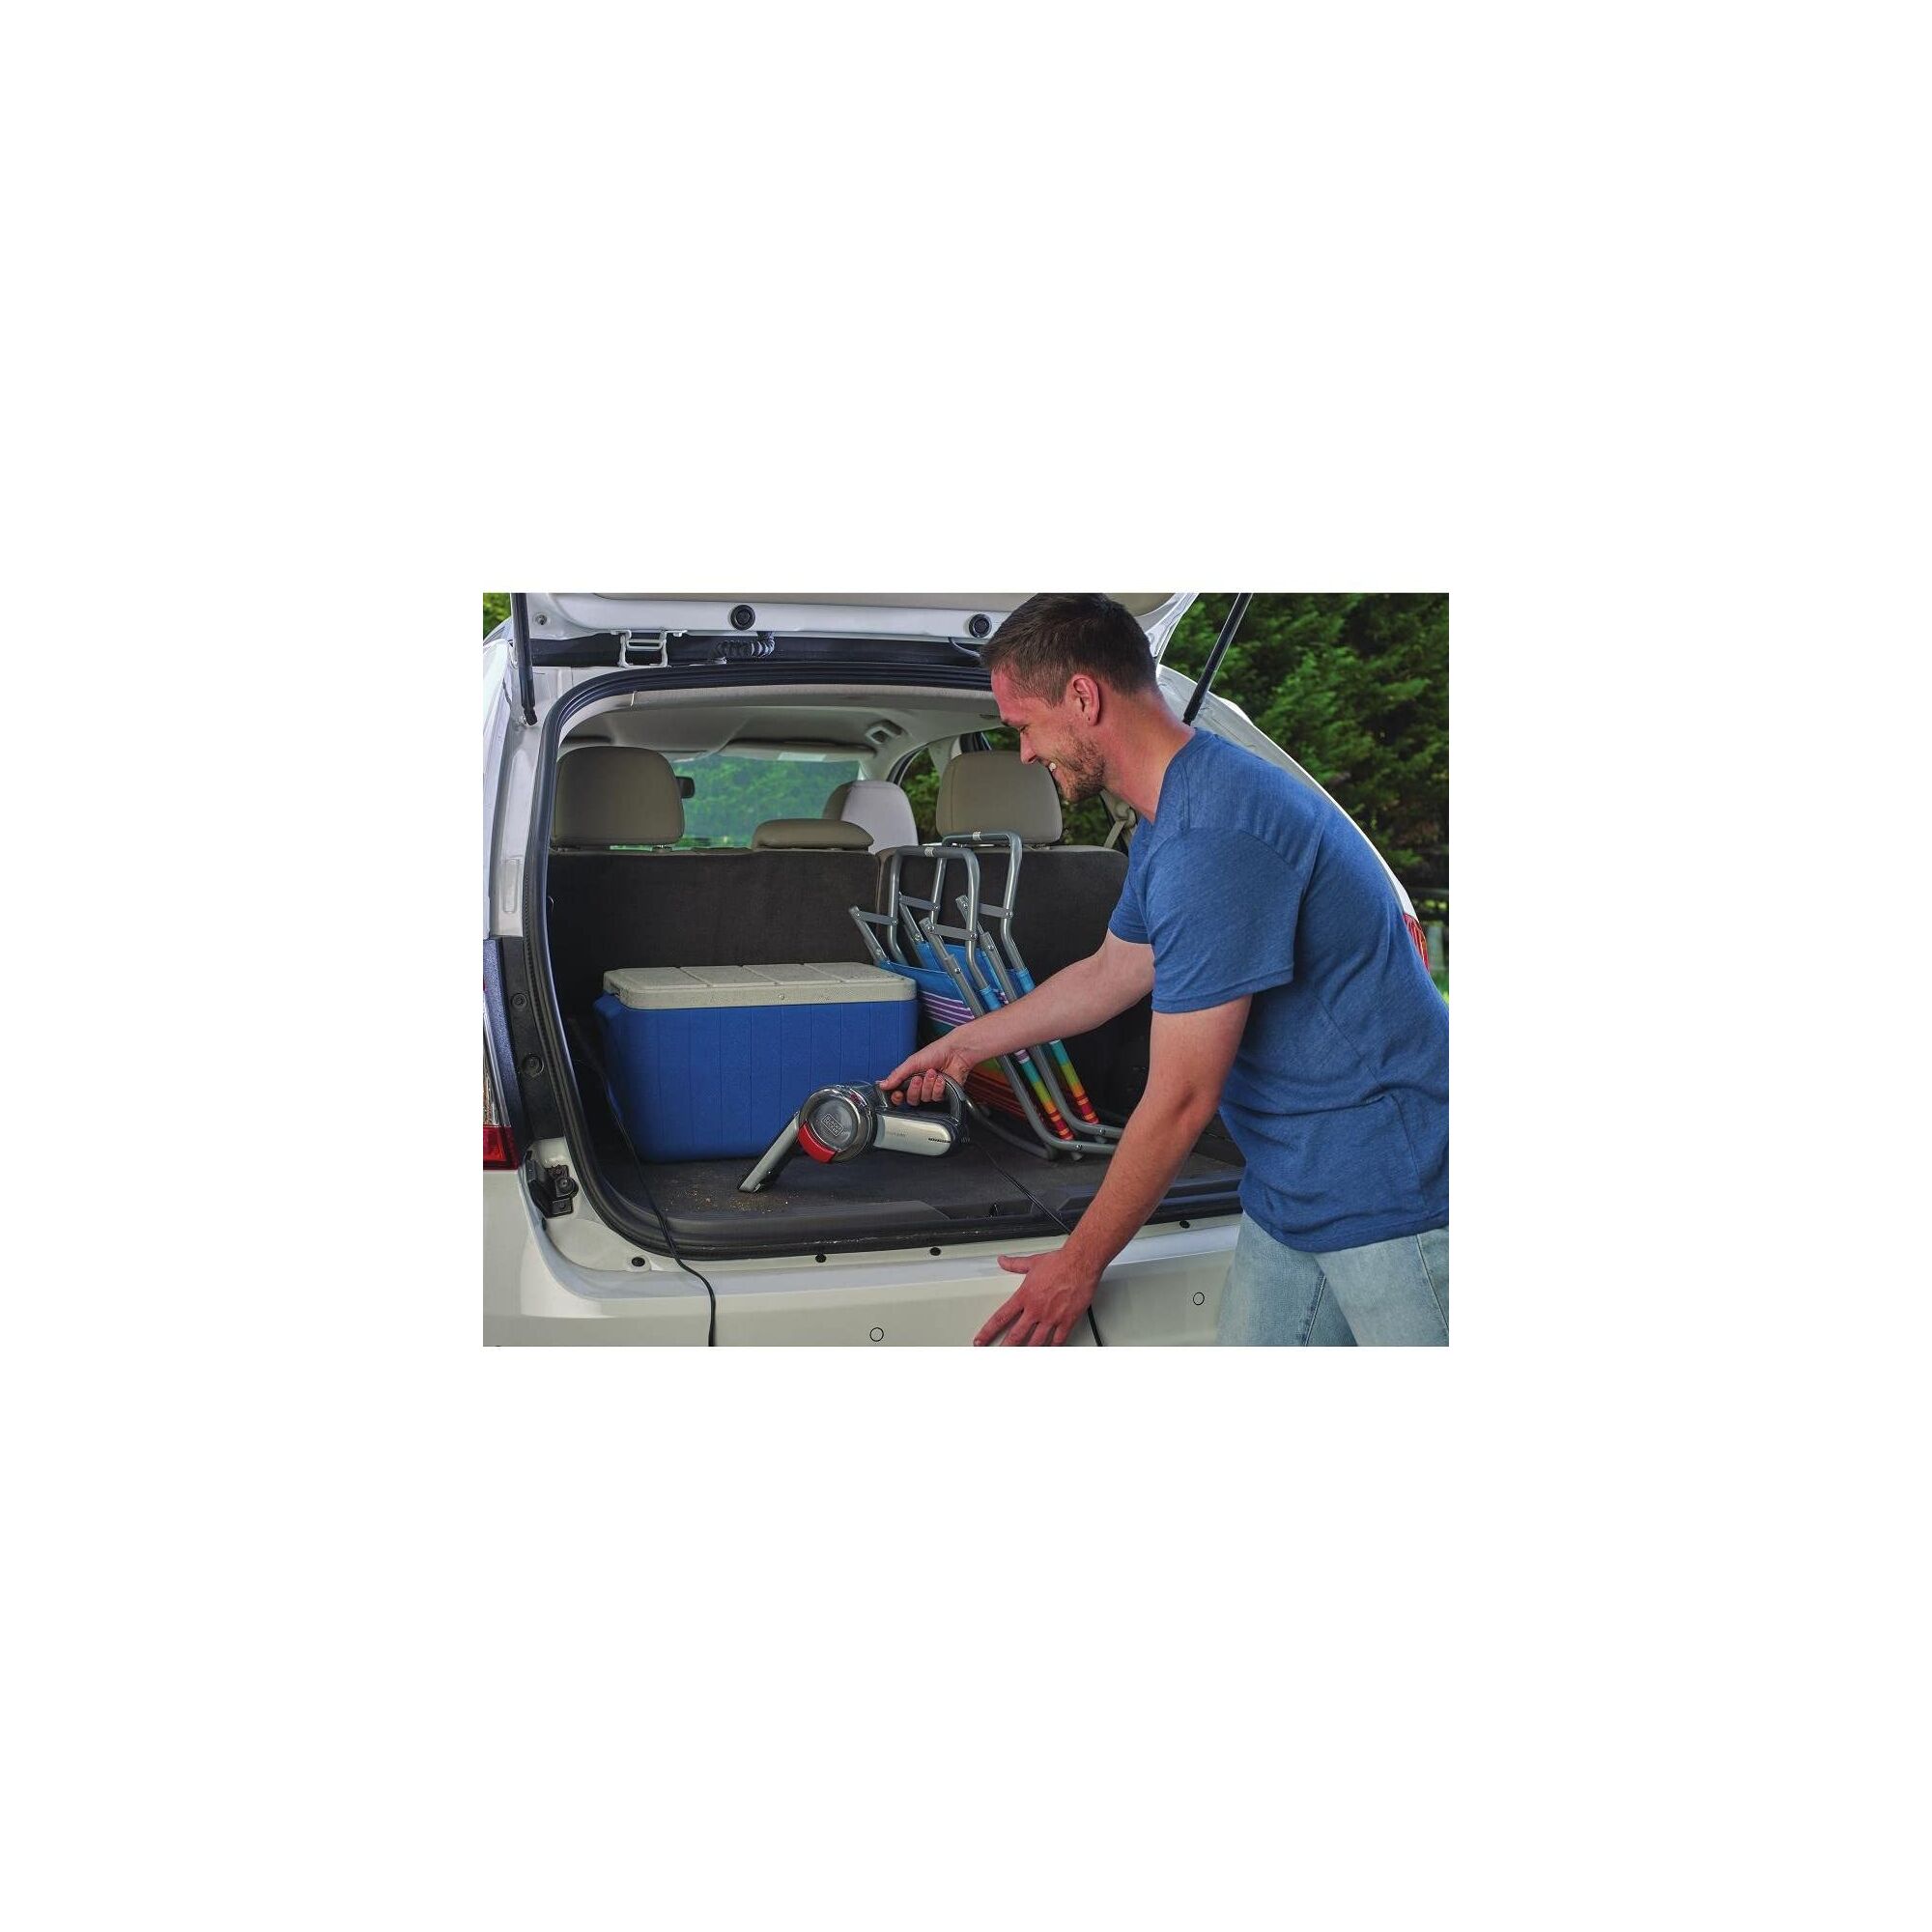 Man using Auto Vacuum to clean the back of a small SUV.